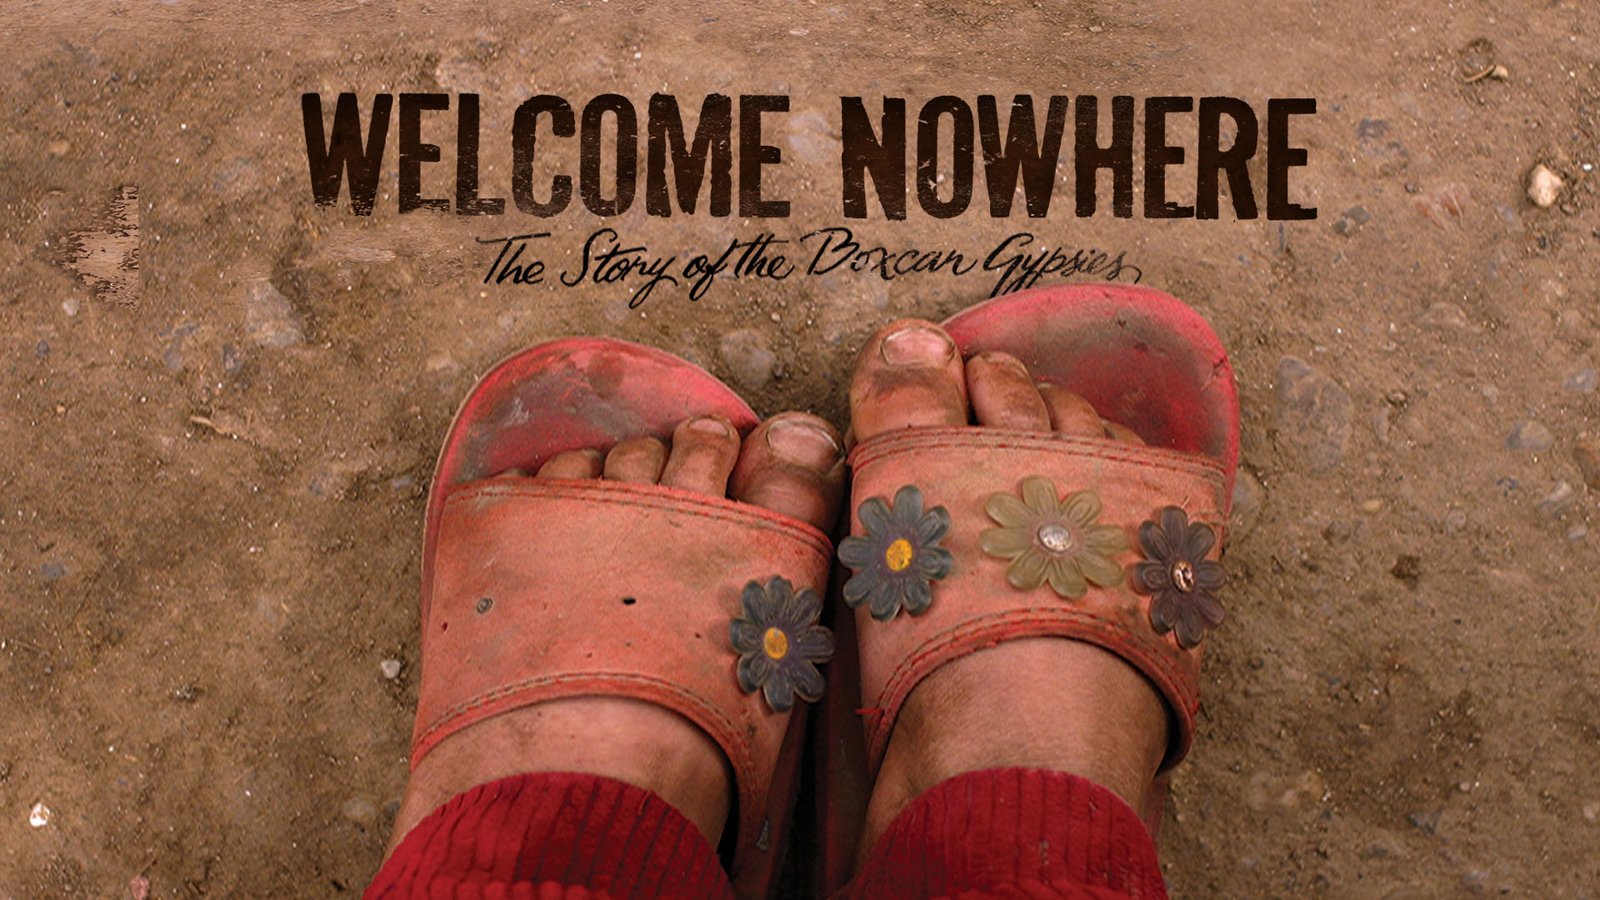 Welcome Nowhere - A Community of Roma People Fighting for Homes